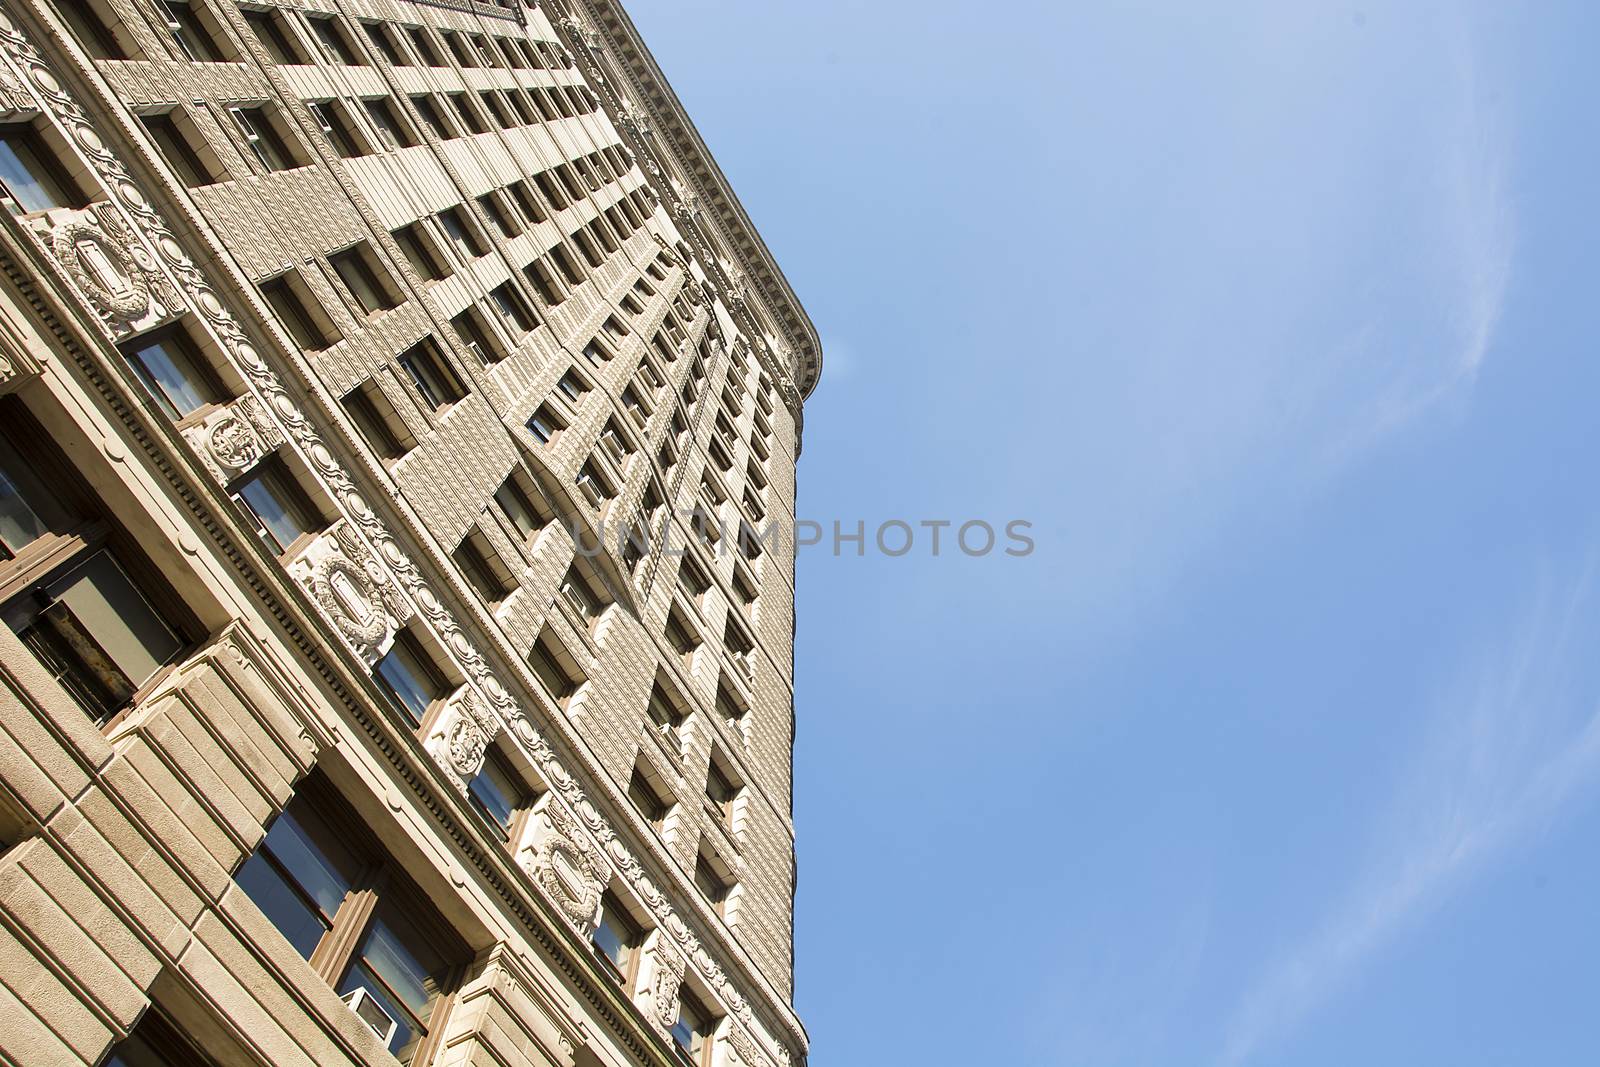 Flat Iron building from the bottom by rarrarorro